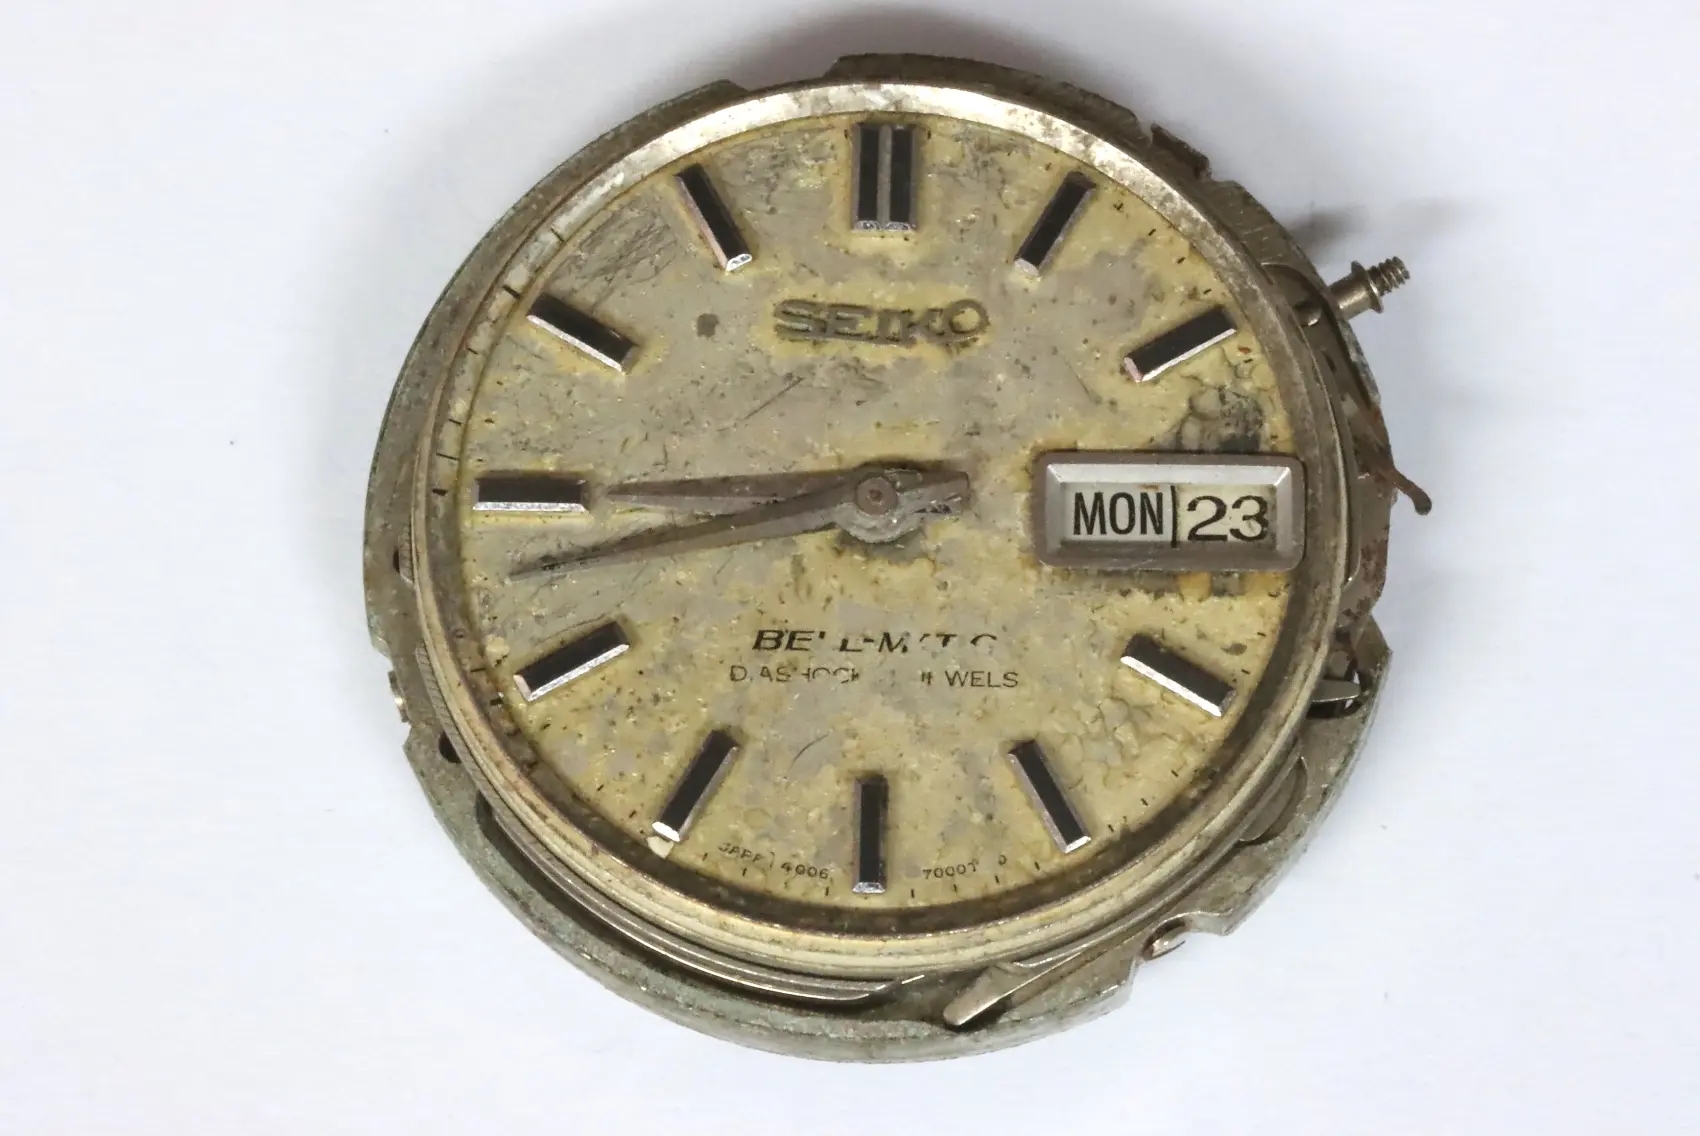 Seiko 4006A bell-matic movement with rusty parts